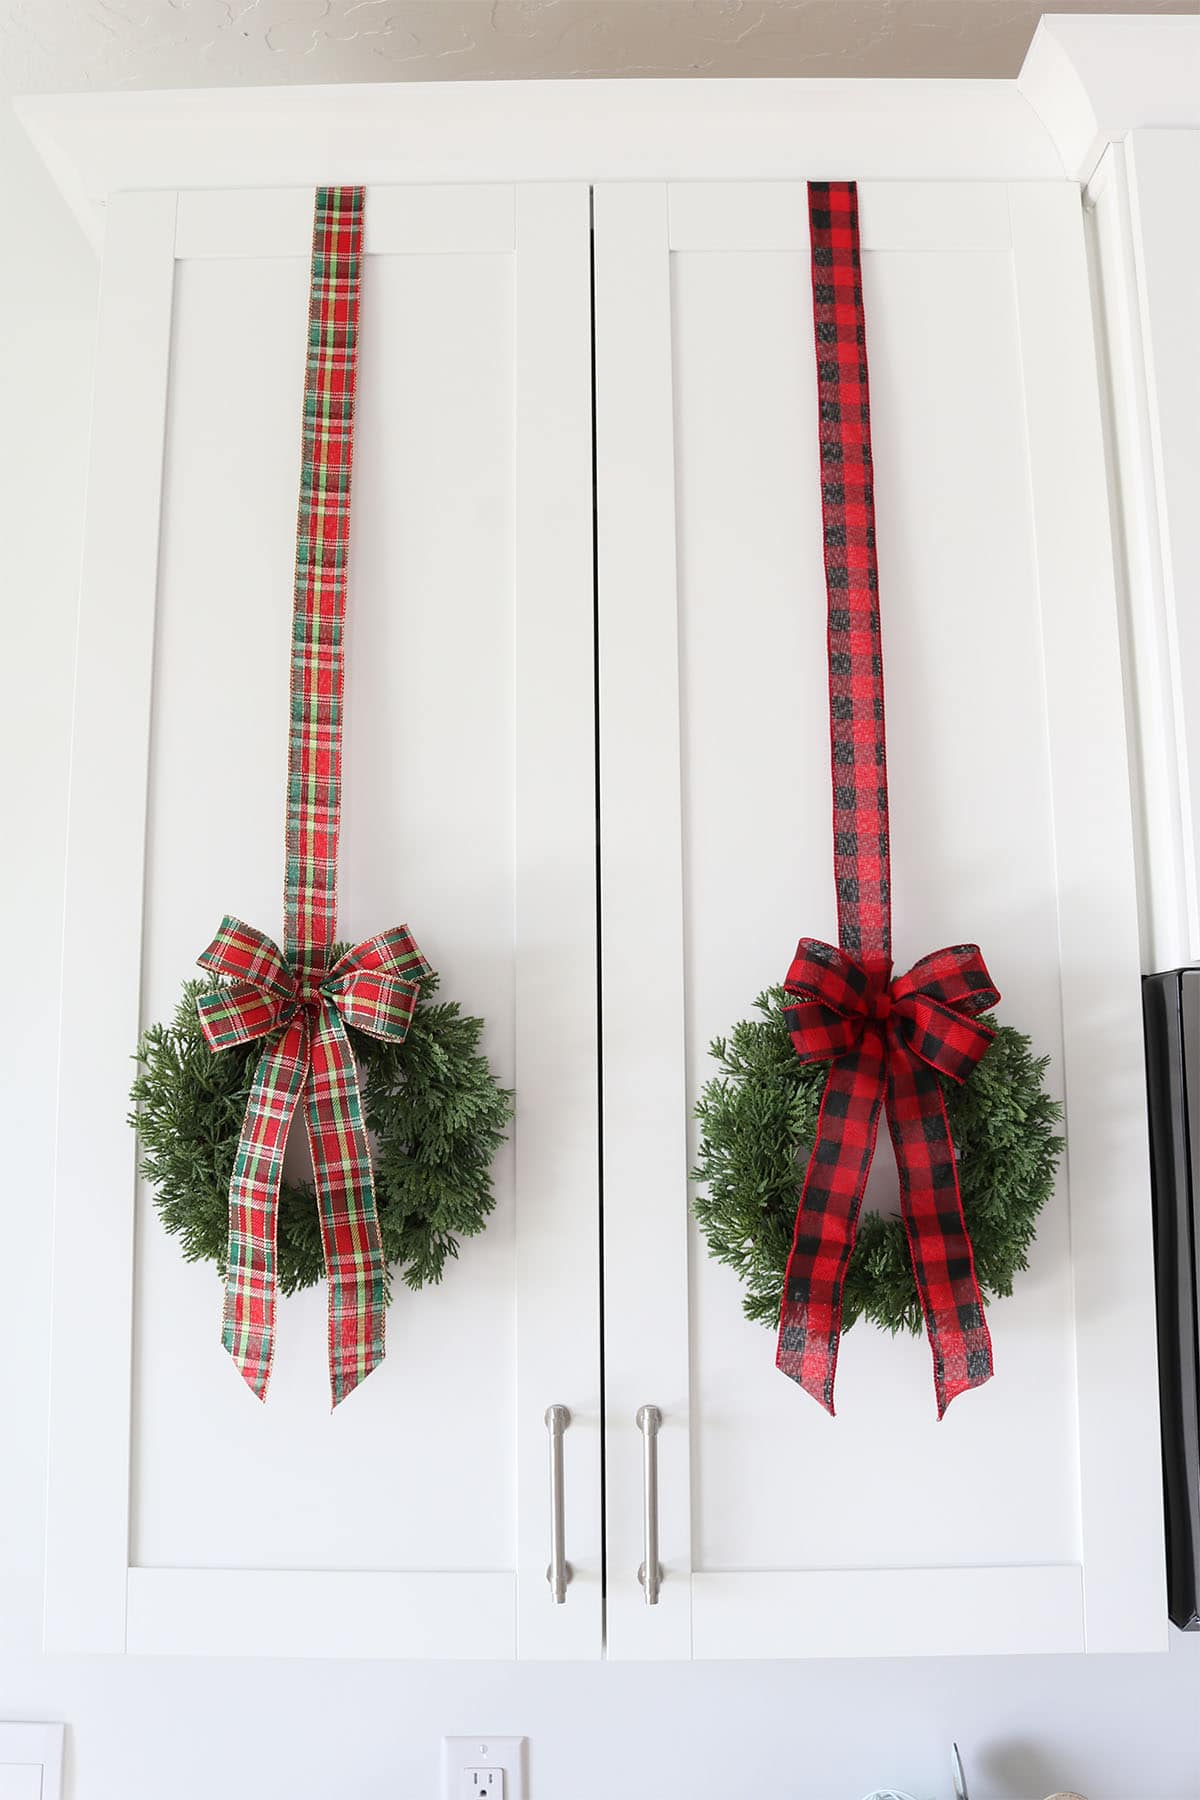 Christmas wreaths on kitchen cabinets